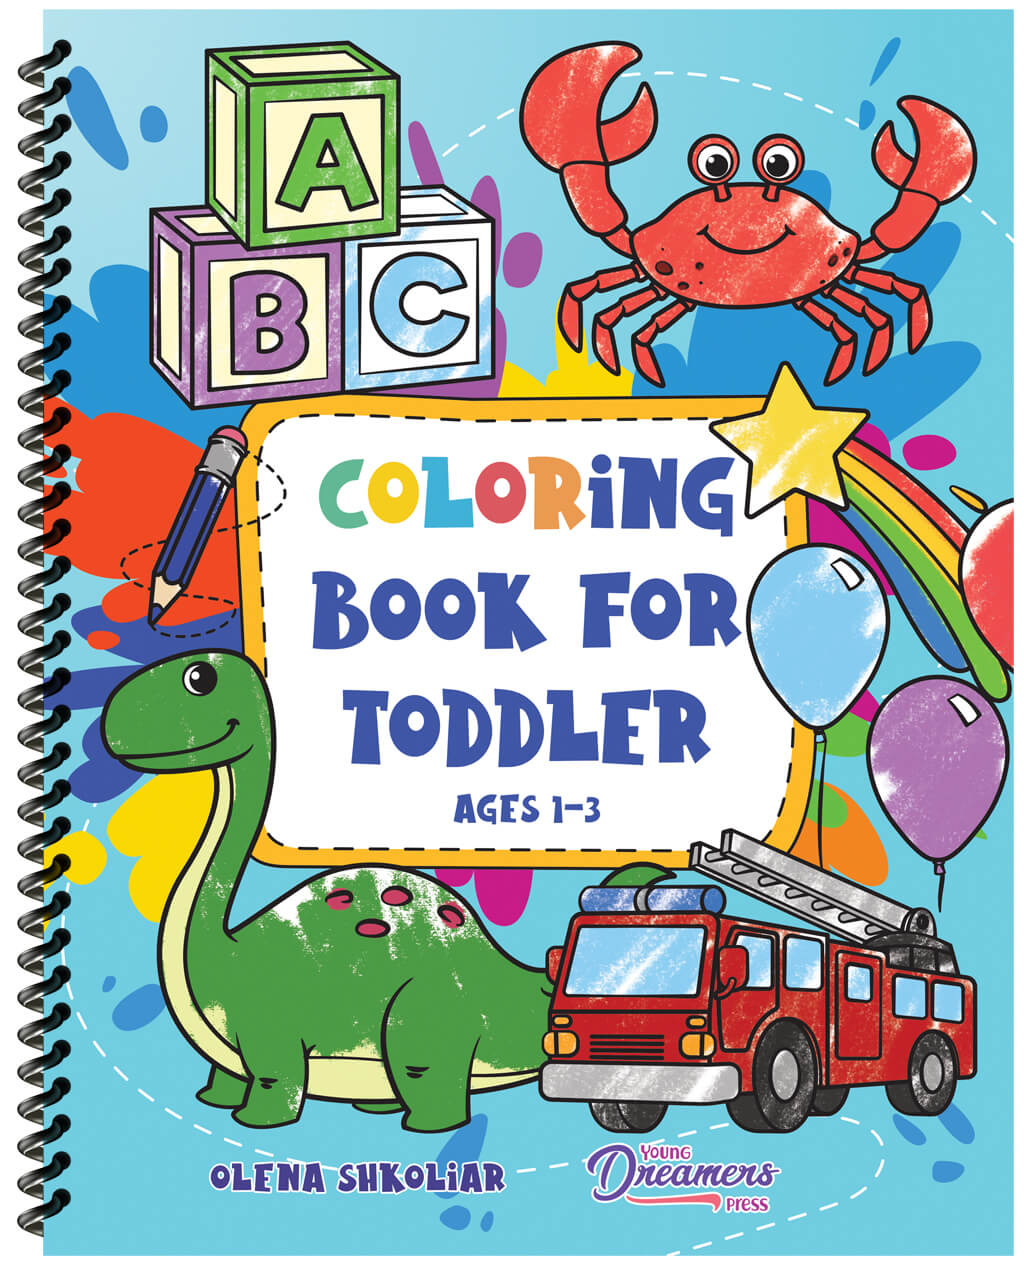 Coloring Book for Toddler (Spiral Edition)